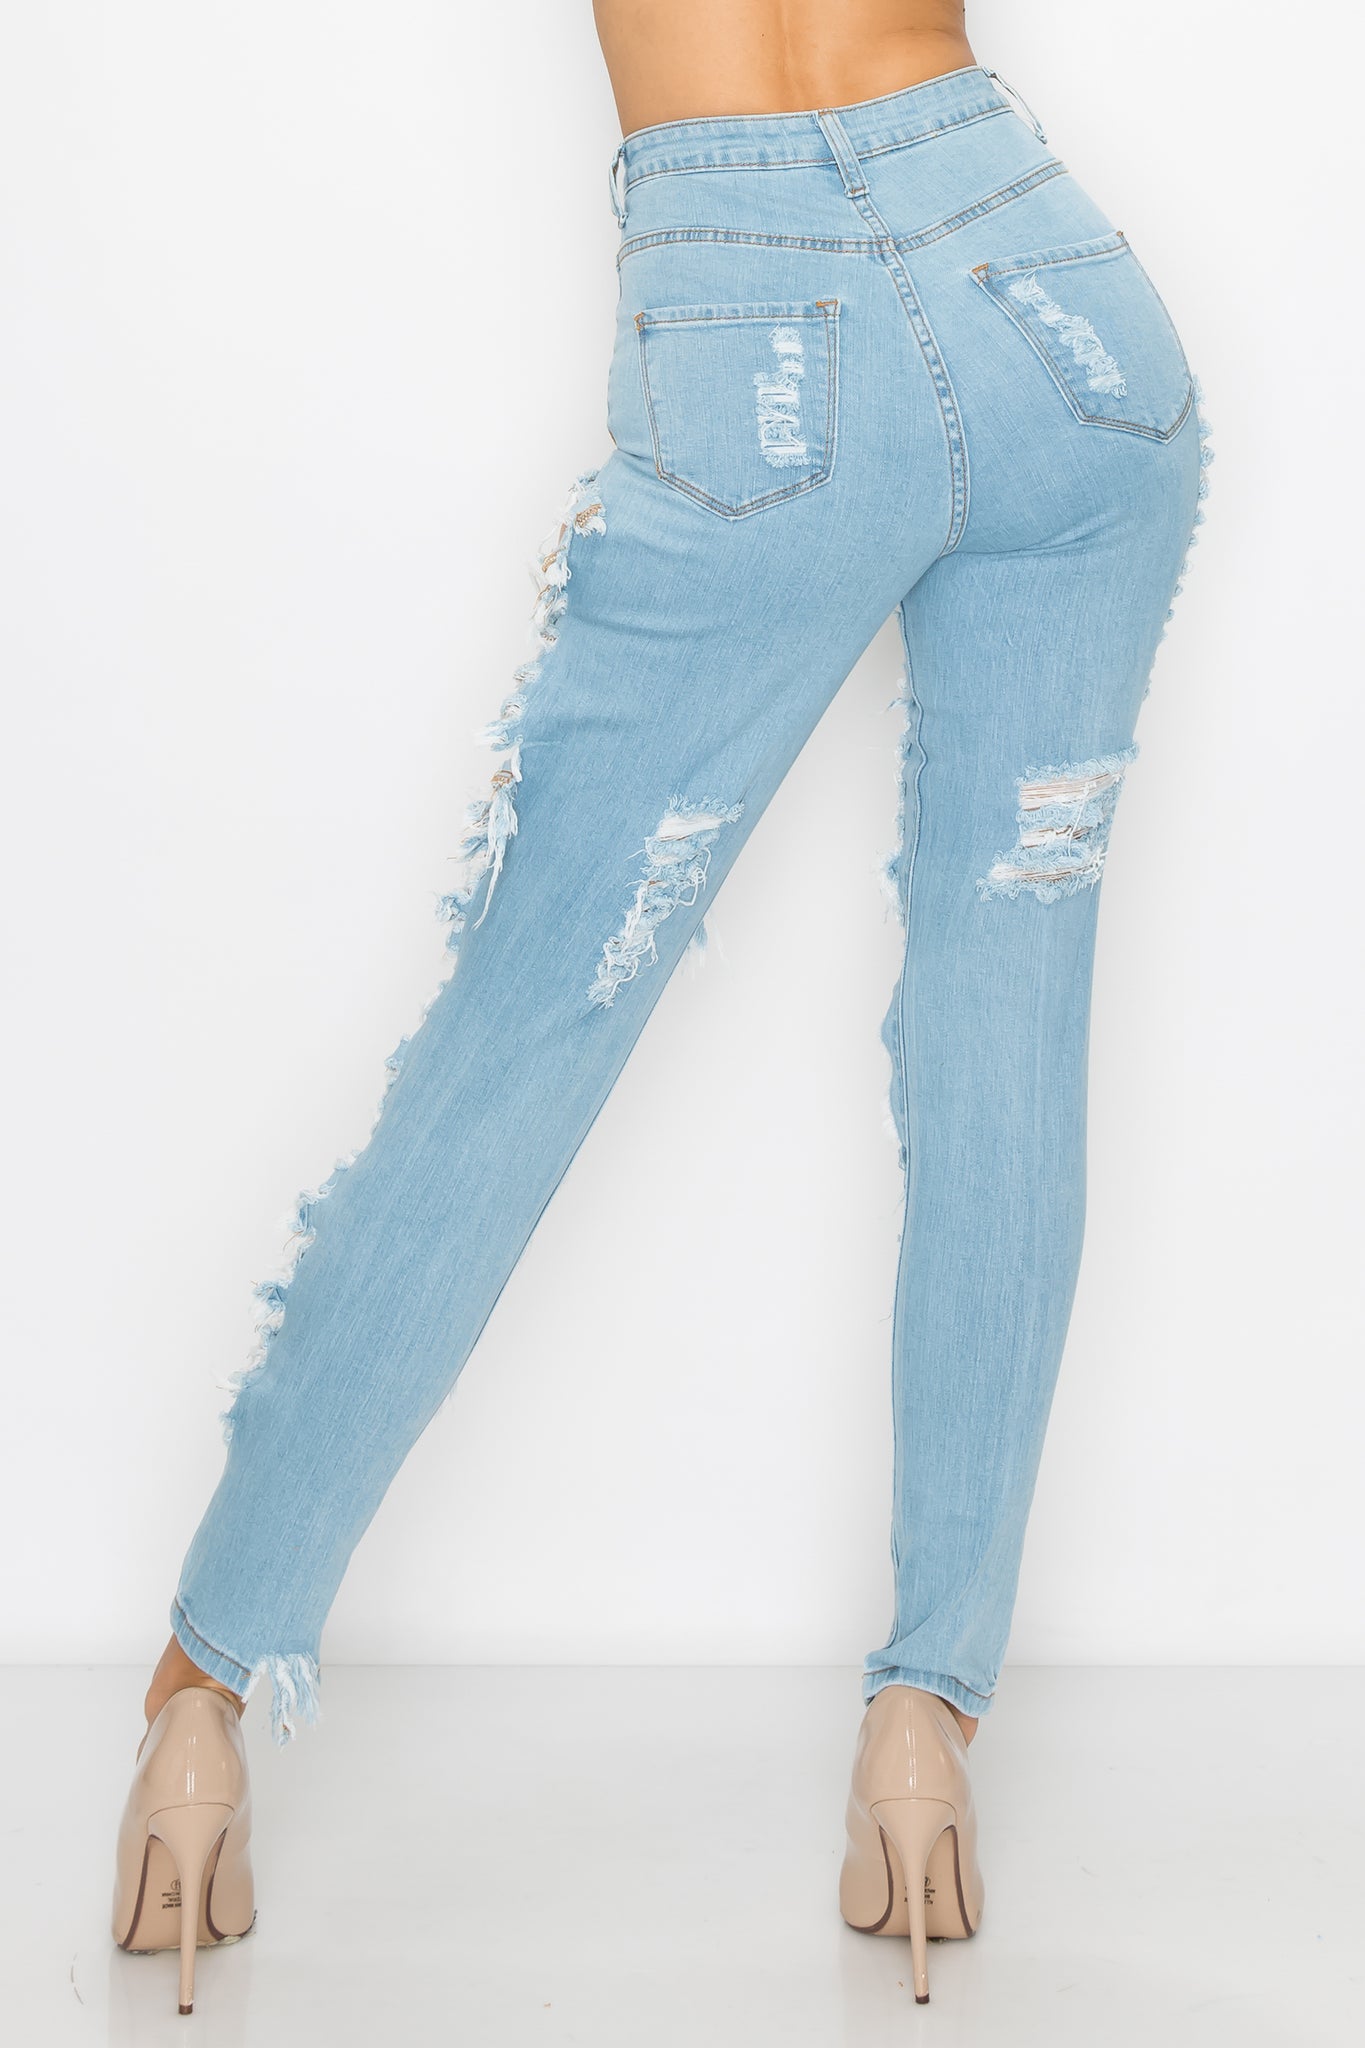 Aphrodite Super High Waisted Distressed Skinny Jeans with Cut Outs